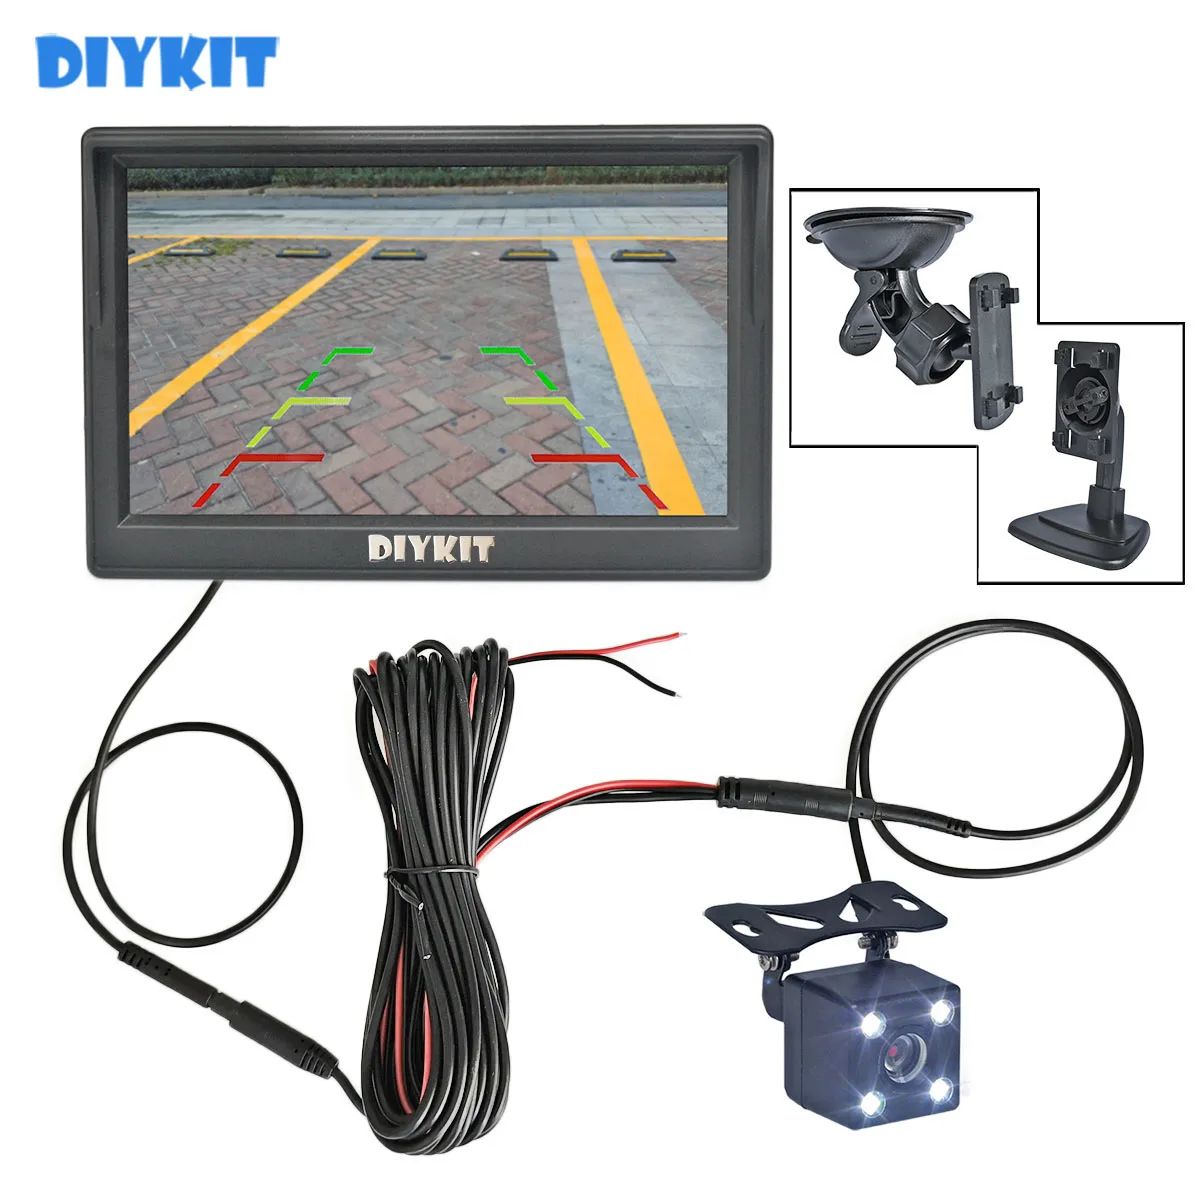 DIYKIT 5inch Car Monitor Vehicle Rear View Reverse Backup LED Night Vision Car Camera Video Parking System Easy Installation